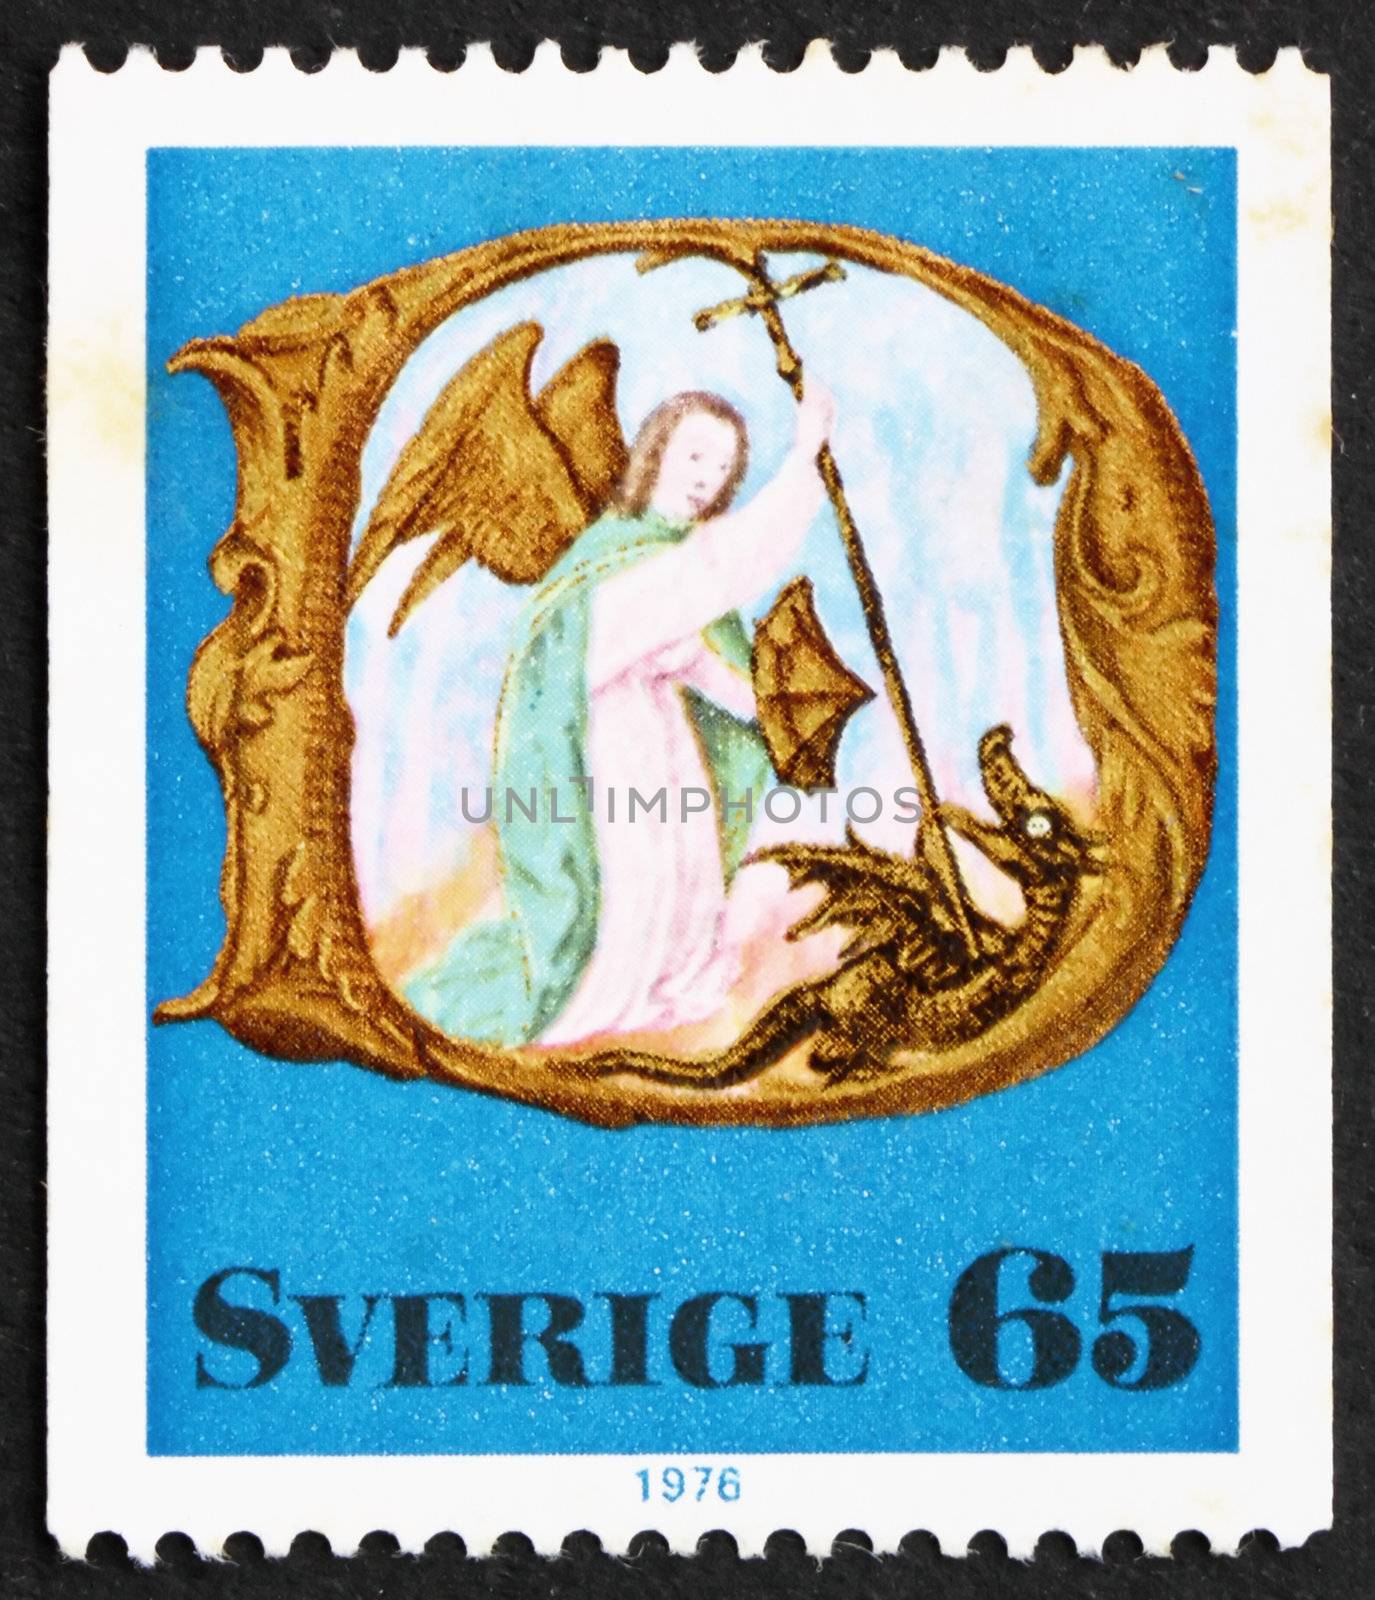 SWEDEN - CIRCA 1976: a stamp printed in the Sweden shows Archangel Michael, Design from Flemish Prayer Book 1500, Christmas, circa 1976